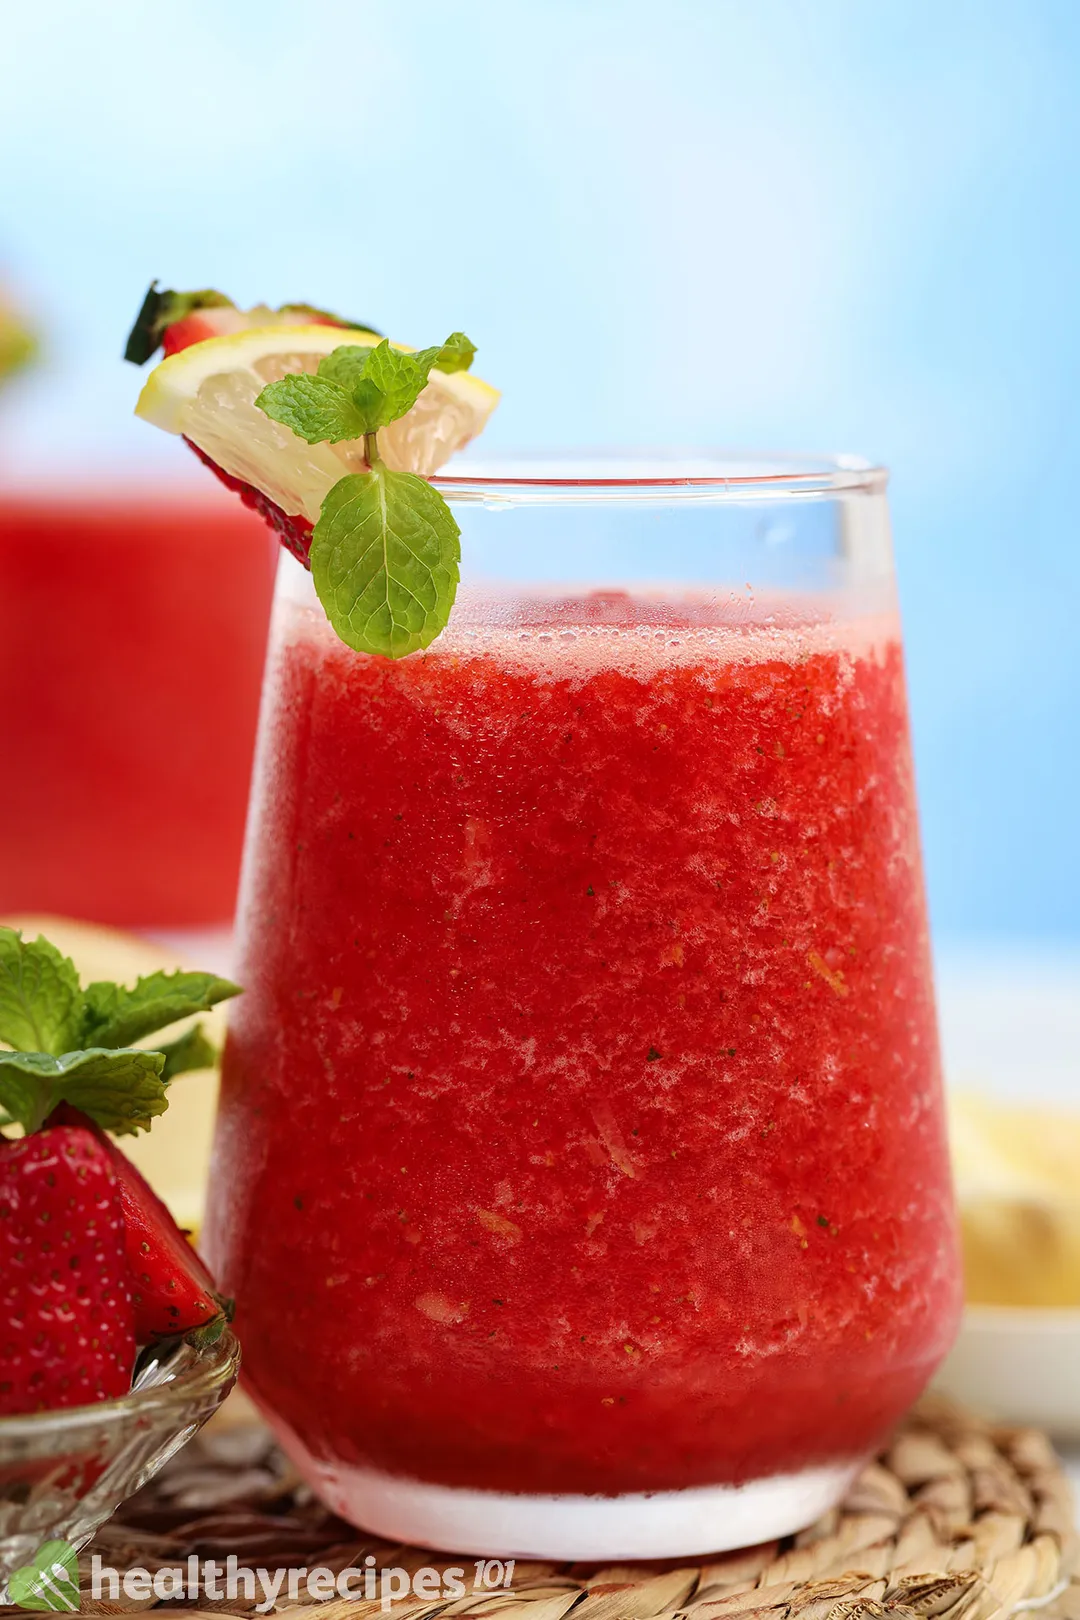 a glass of strawberry lemonade smoothie, decorated with lemon slice, mint leaves and strawberries